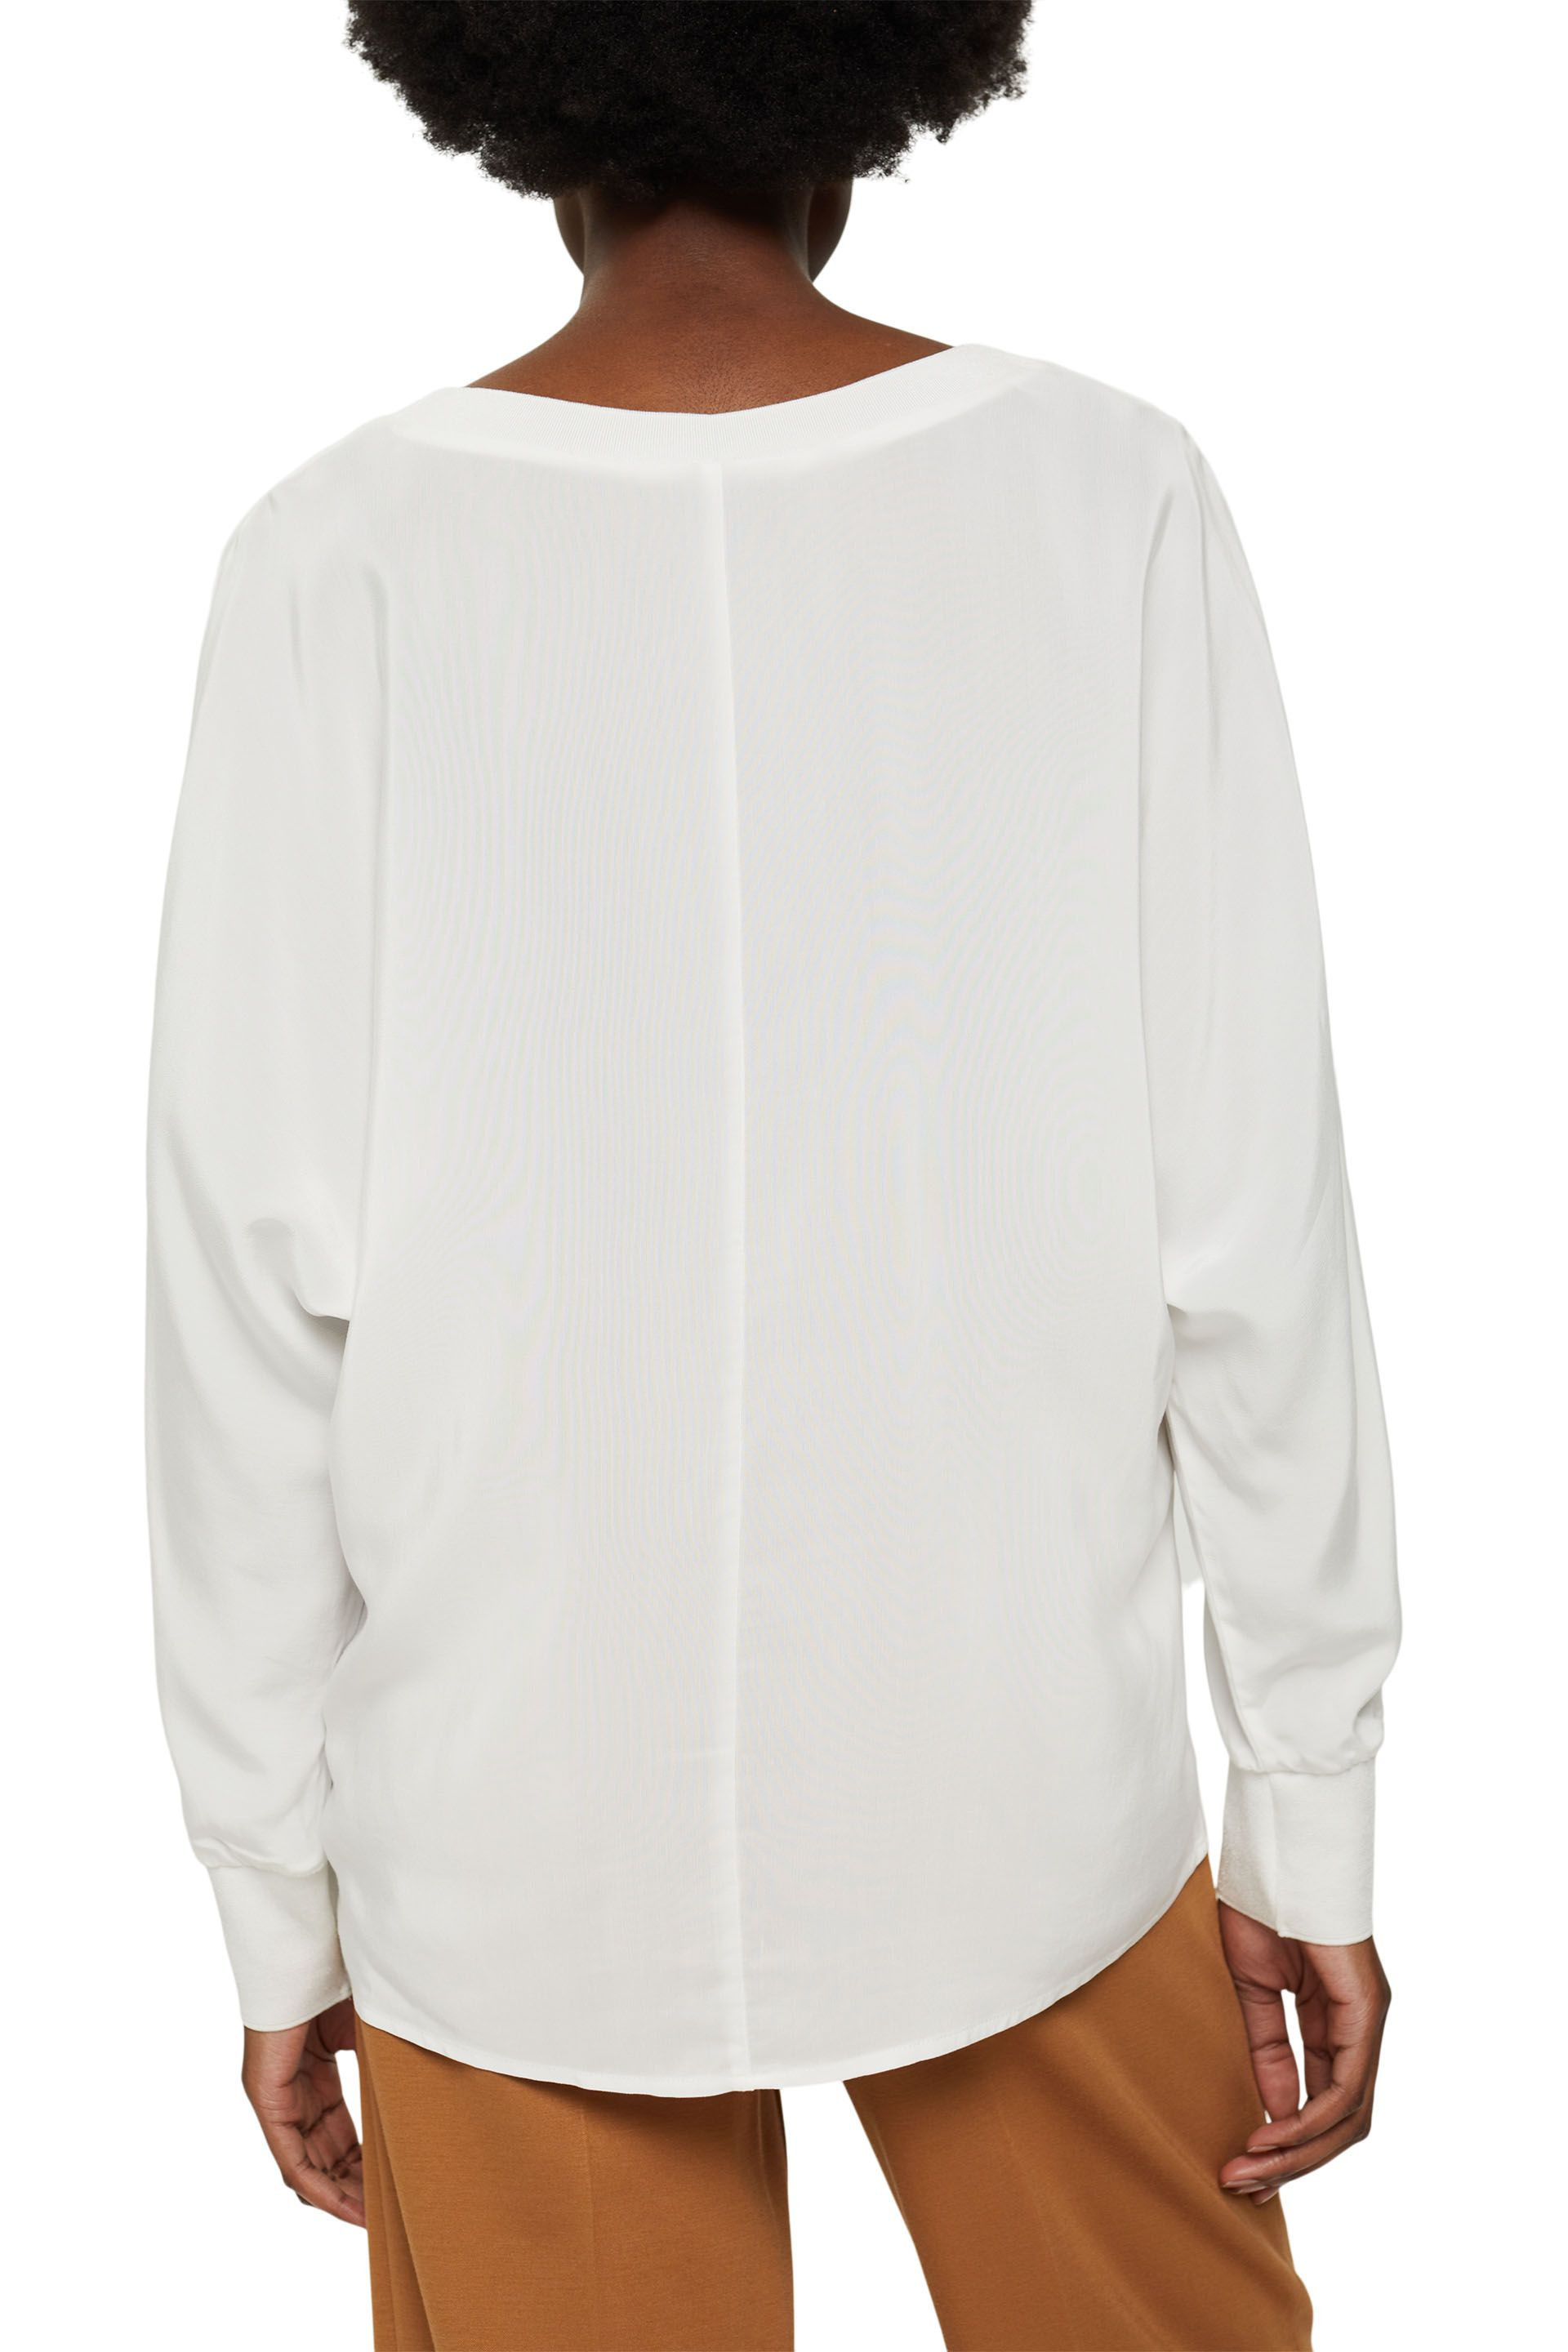 Blouse with sporty edges in ribbed knit, White, large image number 2